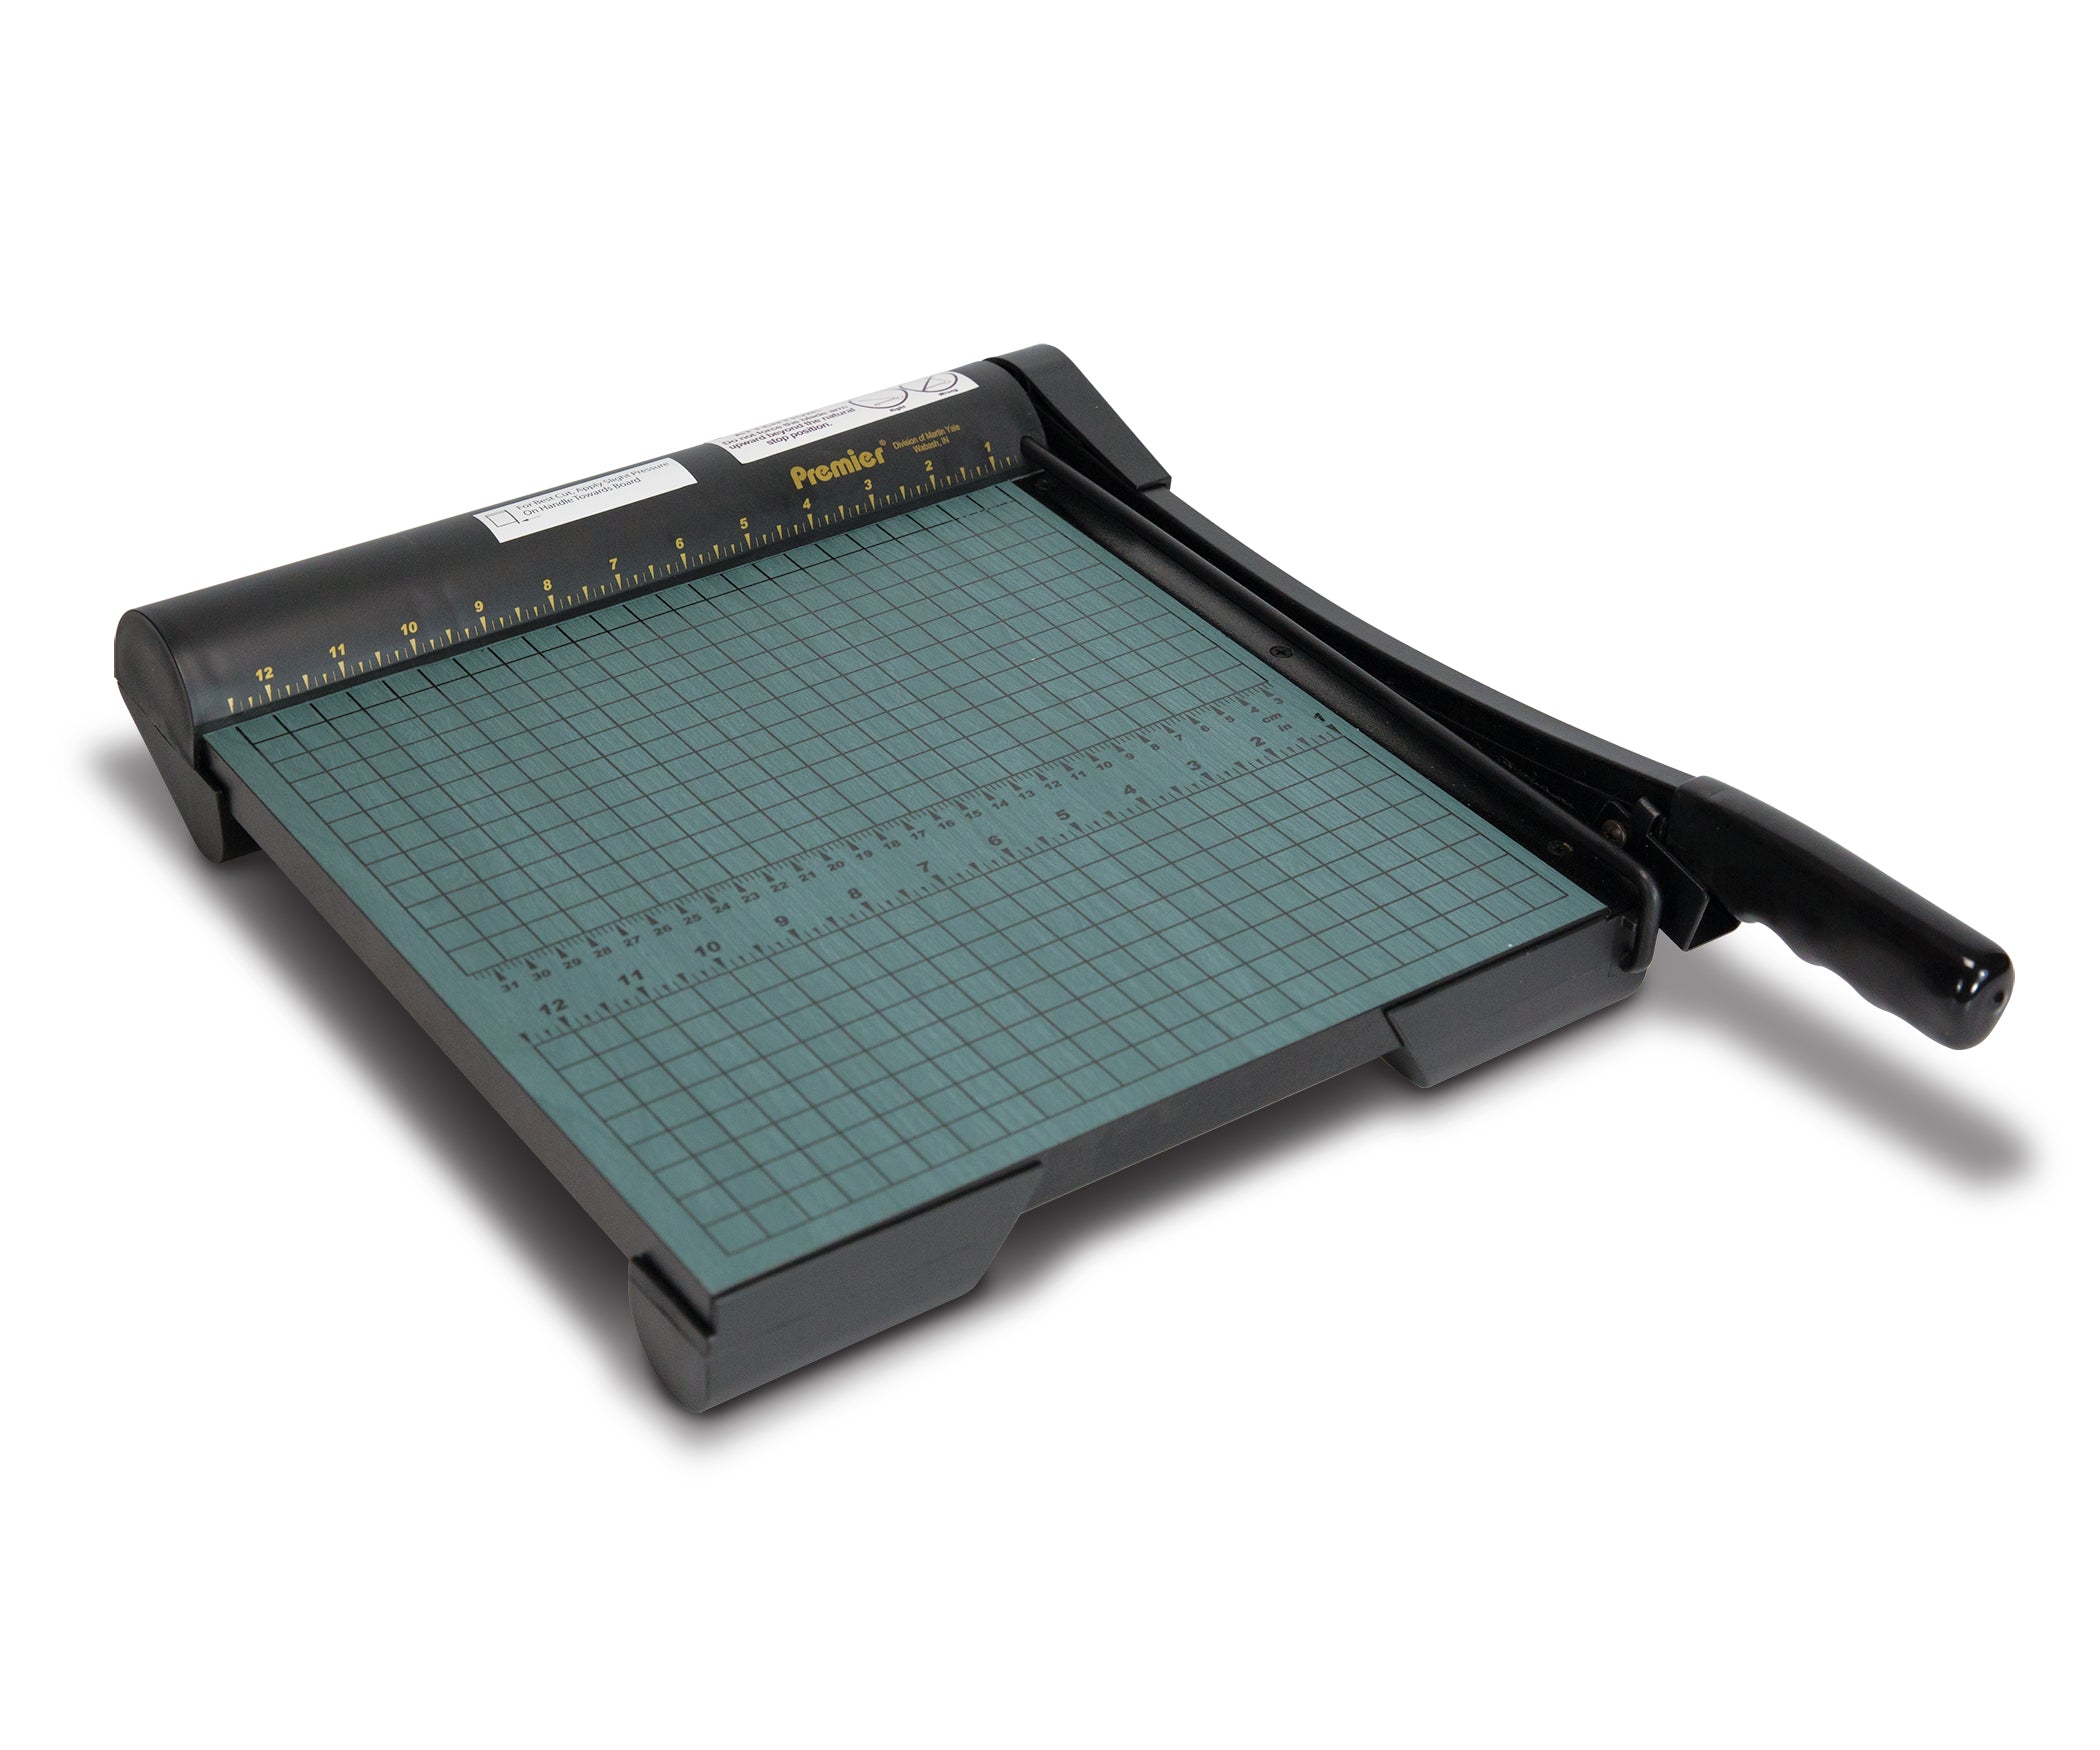 18′′ Automatic Programmable Electric Paper Cutter (450mm)